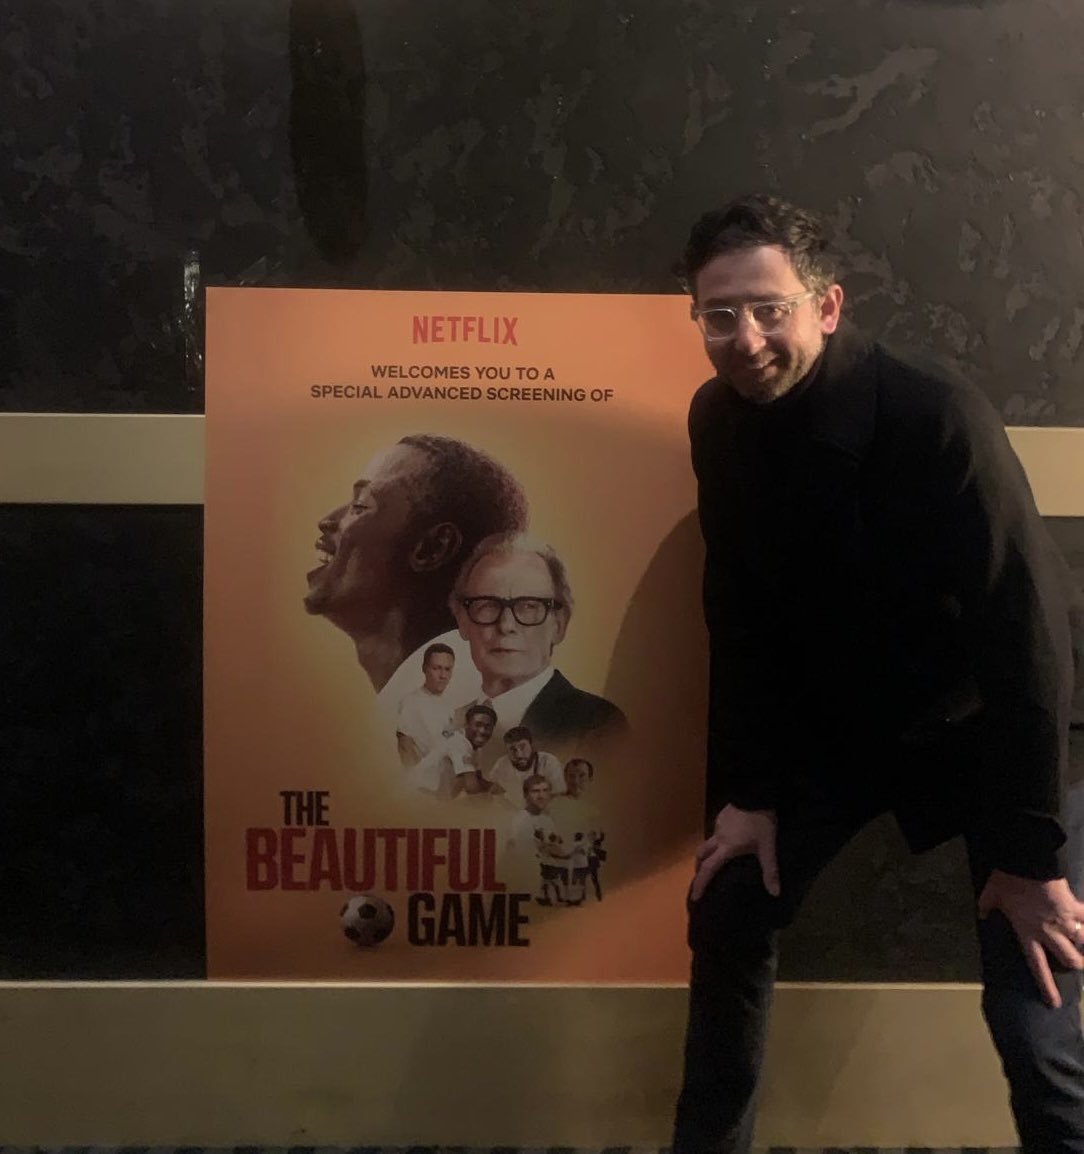 🎬⚽️ Netflix Recommendation

Great pleasure to be at the first screening of “The Beautiful Game”, a film based on the @homelesswrldcup 

Out @Netflix Friday 29th March.

#morethanafilm
#TheBeautifulGame